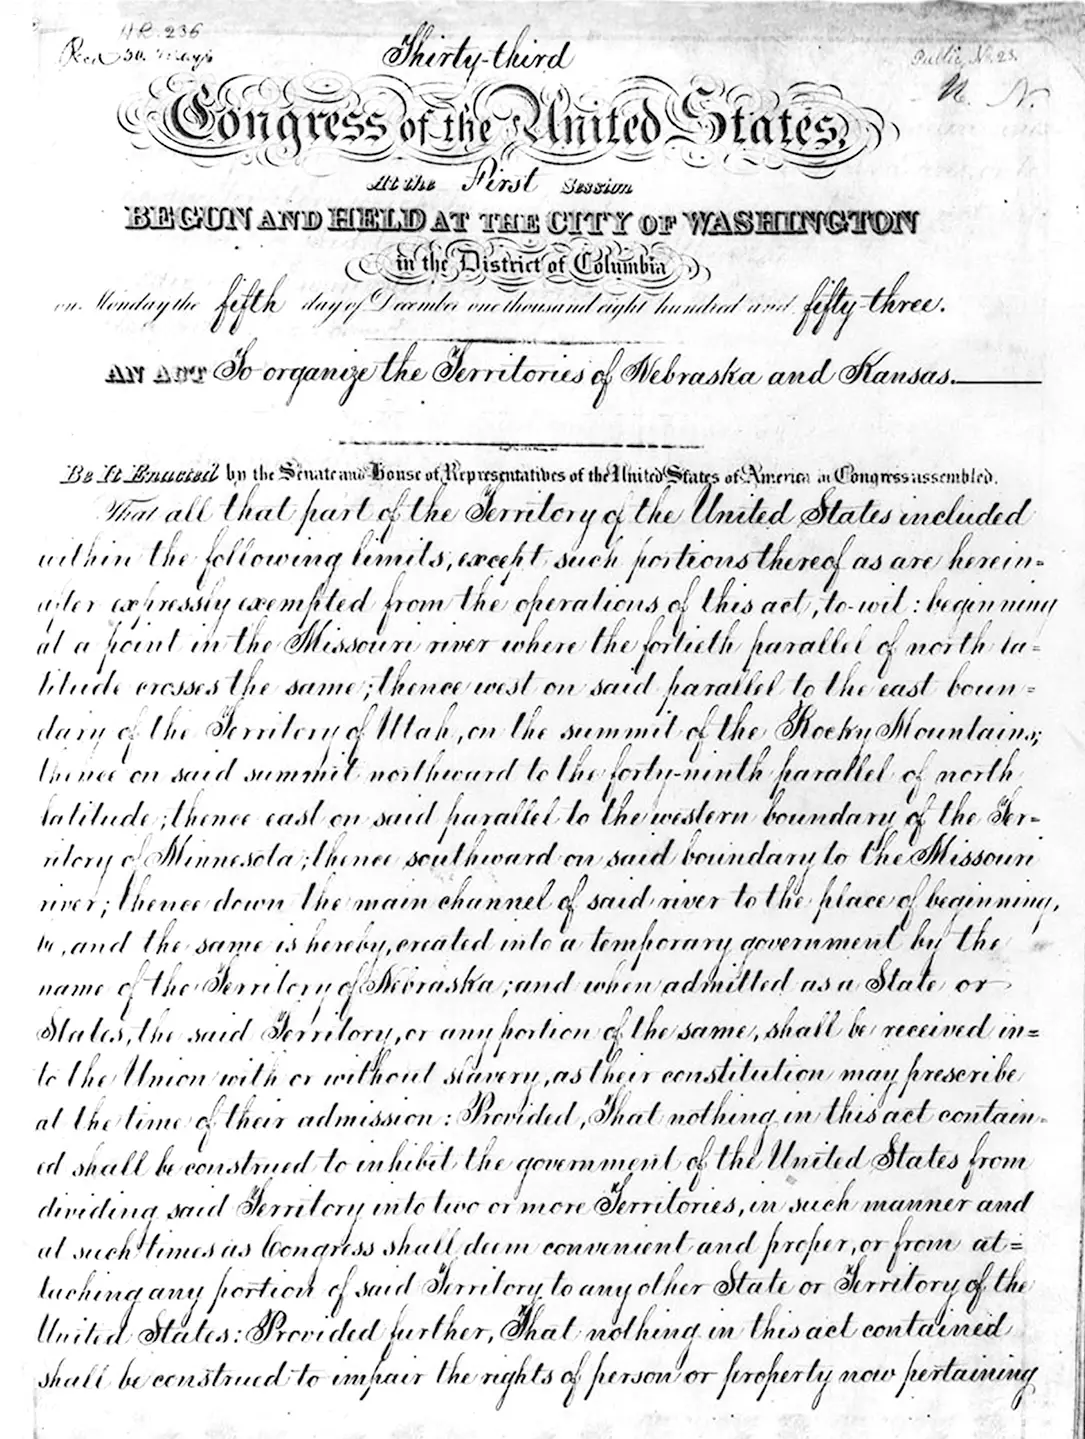 The cover page of the Kansas-Nebraska Act of 1854.